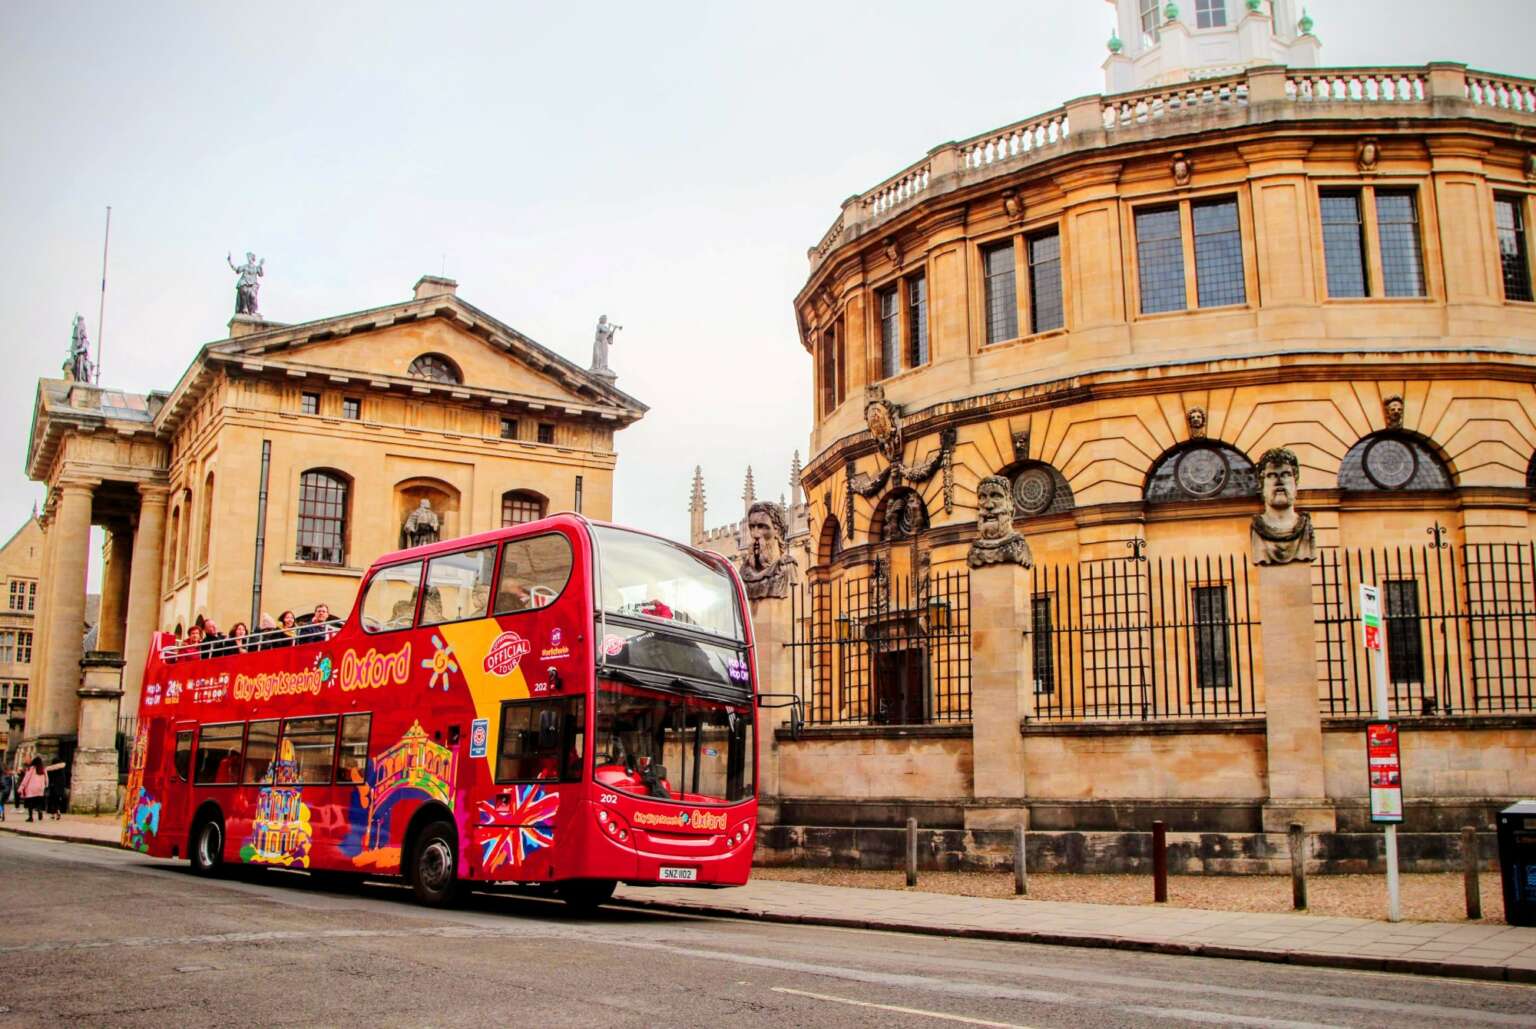 oxford sightseeing tours